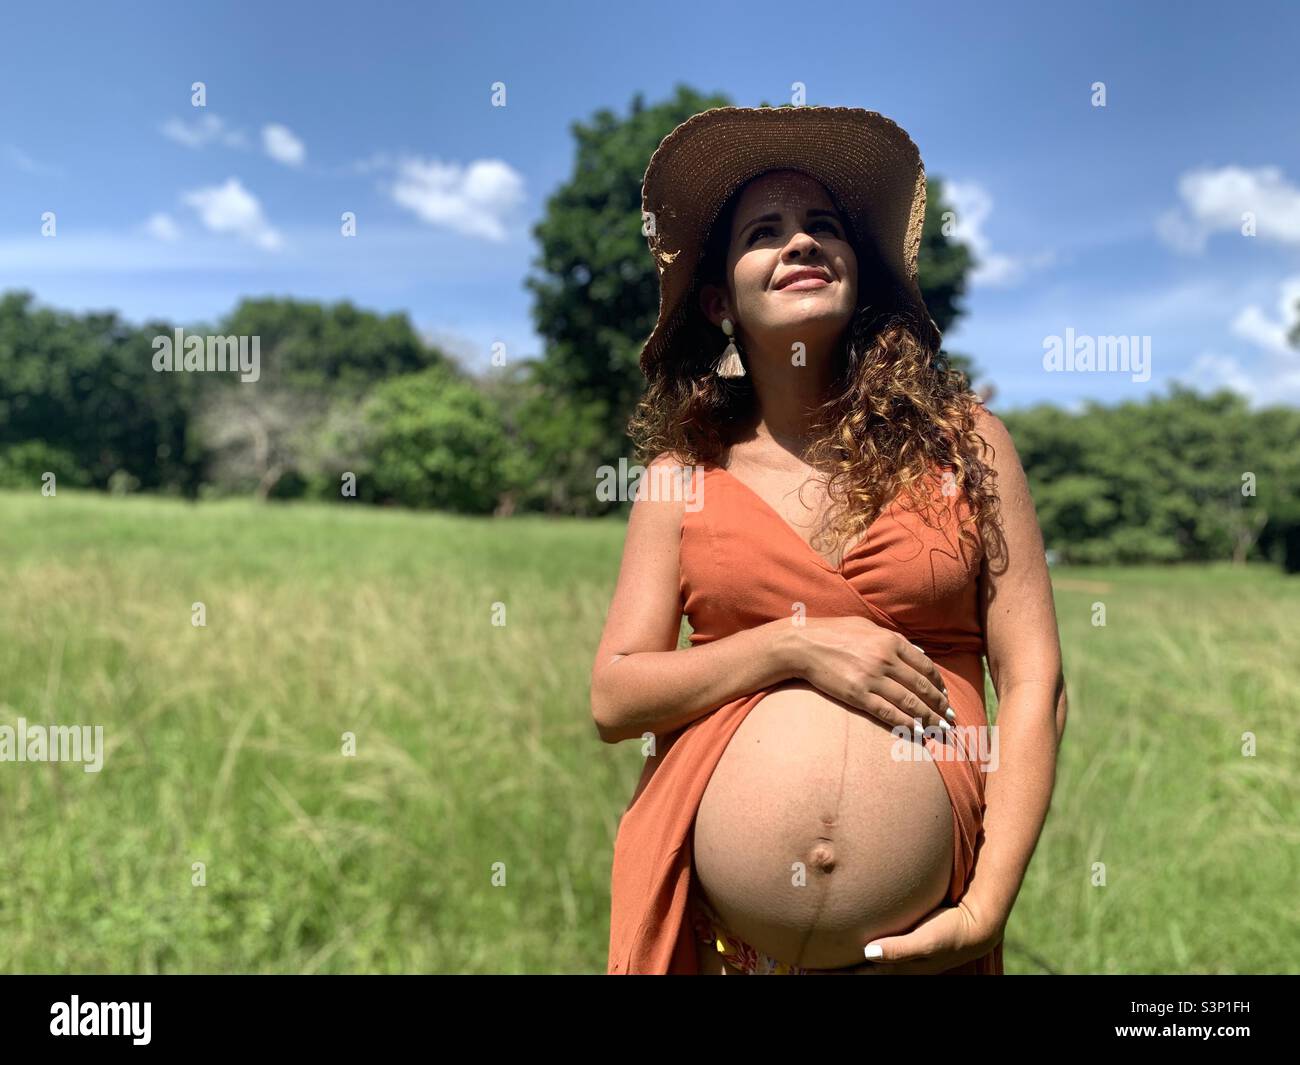 8 month pregnant woman caresses her belly, which shows the linea nigra. Pregnancy expectations. Stock Photo